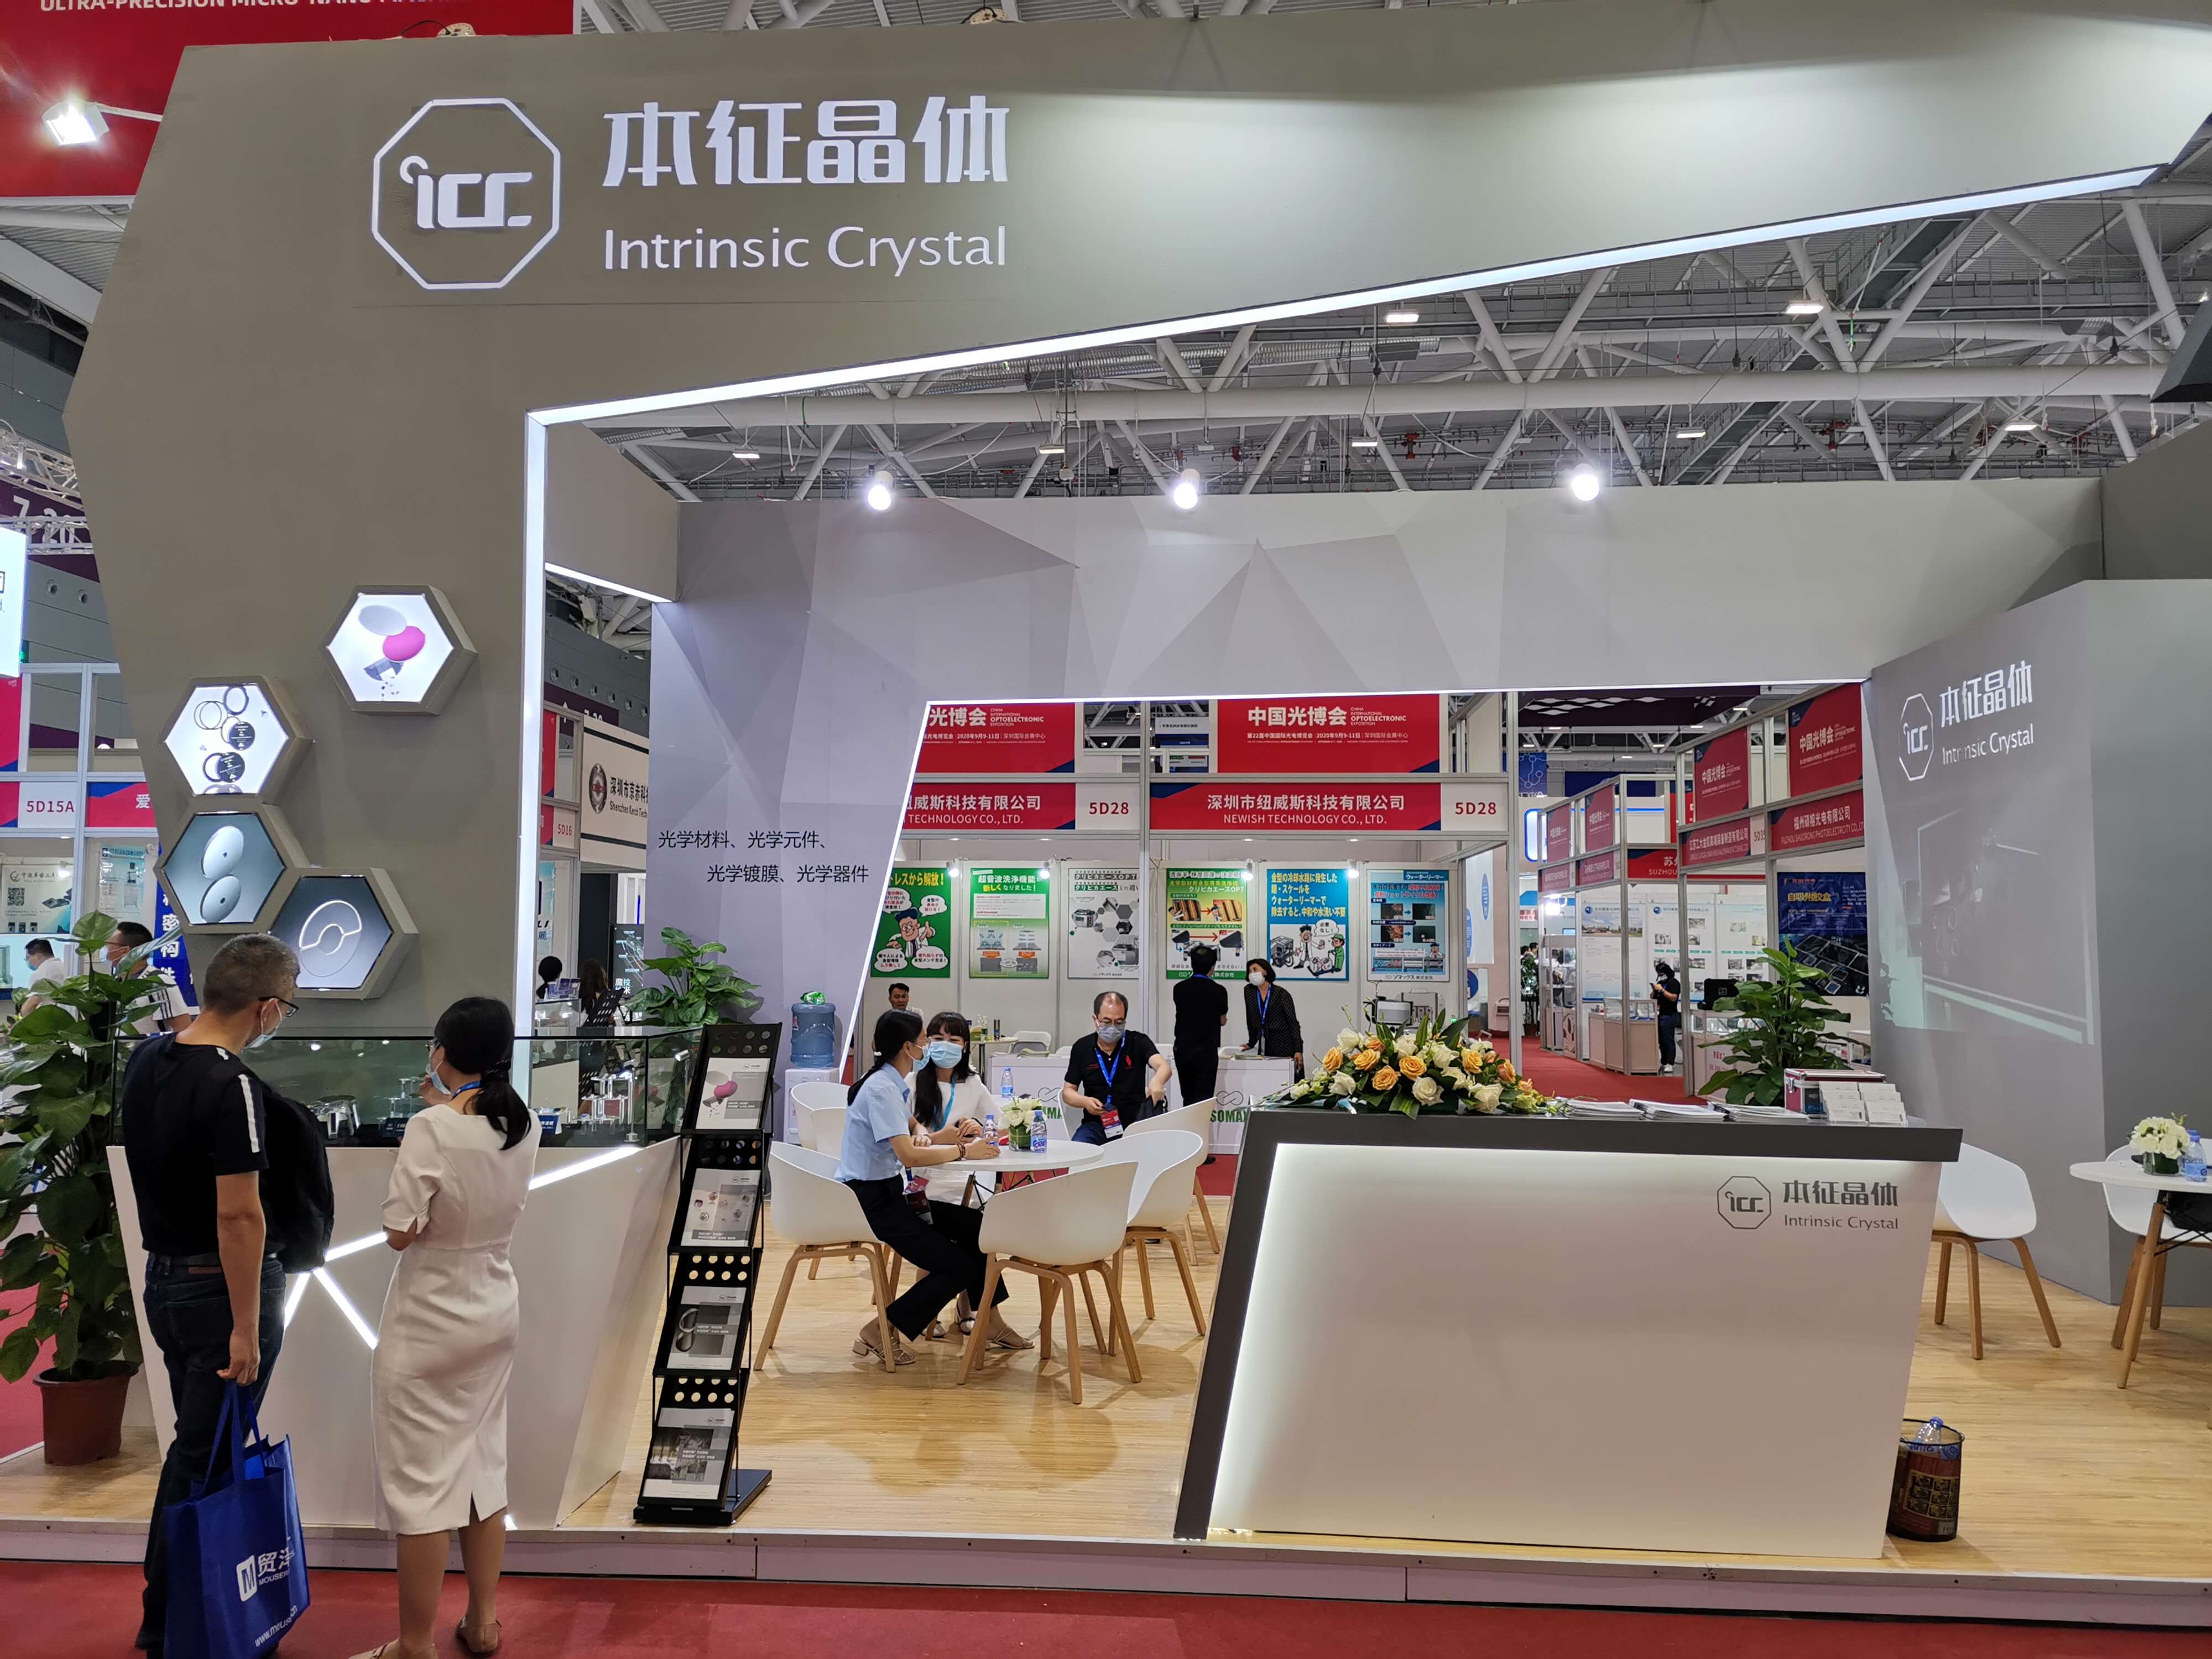 The 22nd China International Optoelectronic Exposition